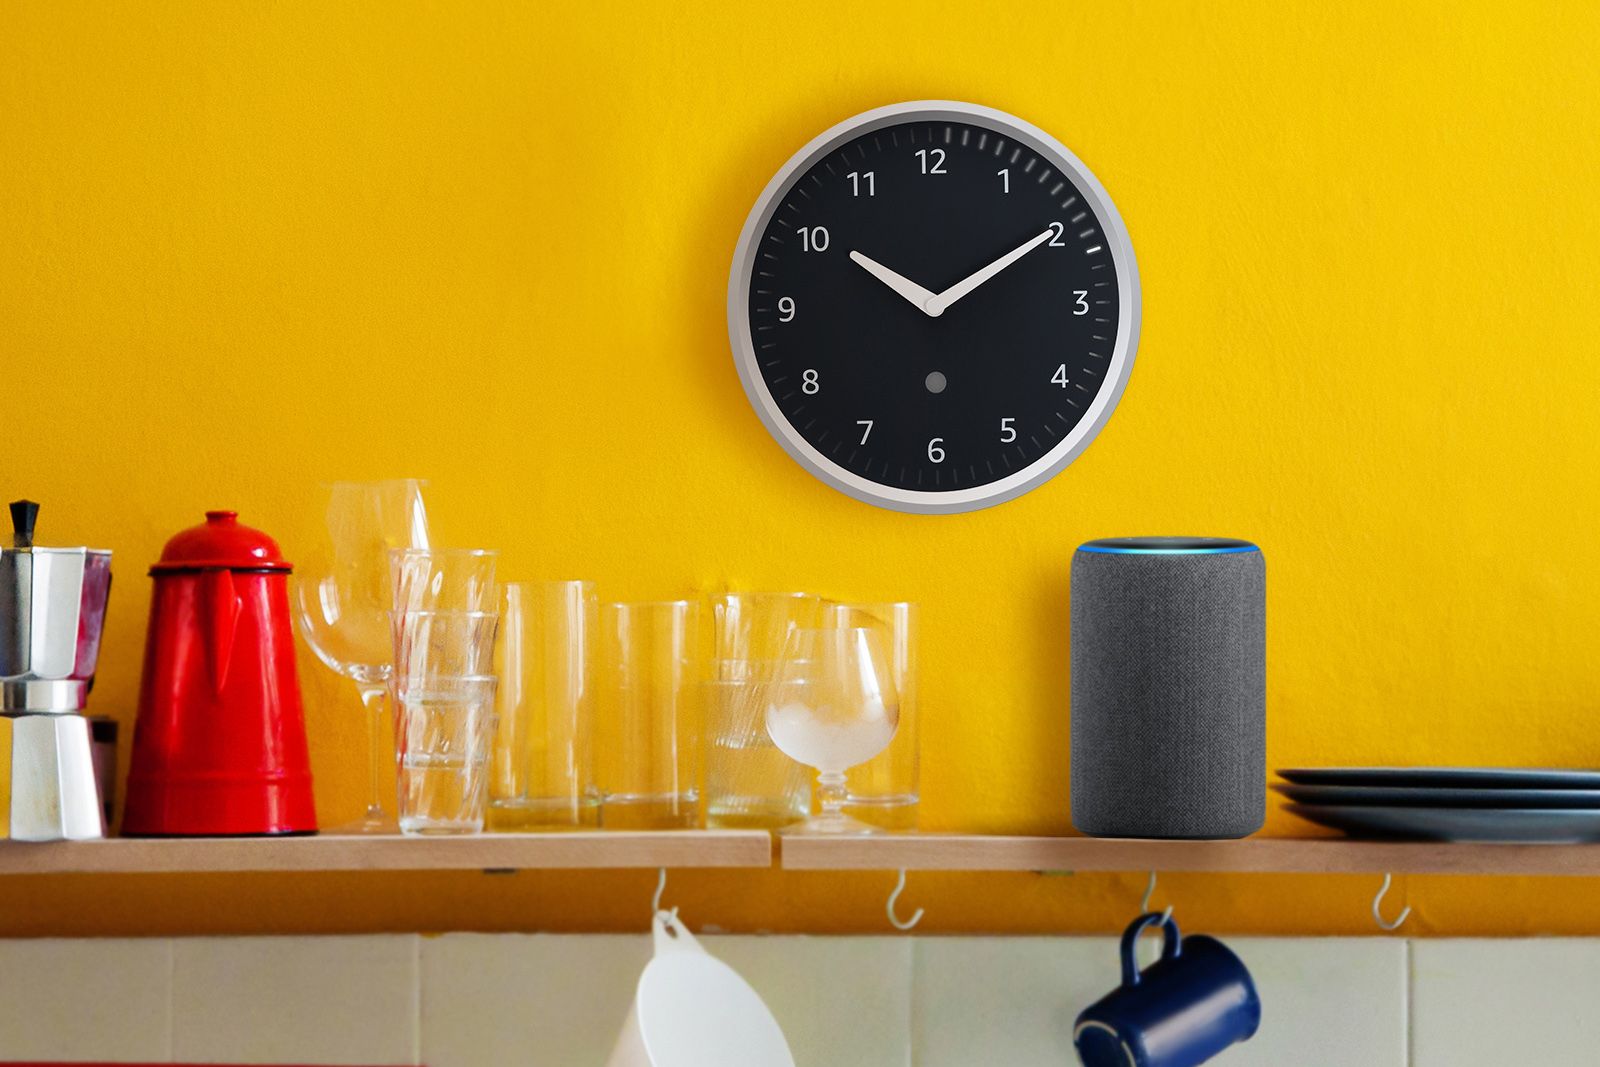 Amazon finally releases the Amazon Echo Wall Clock to visually display timers image 2